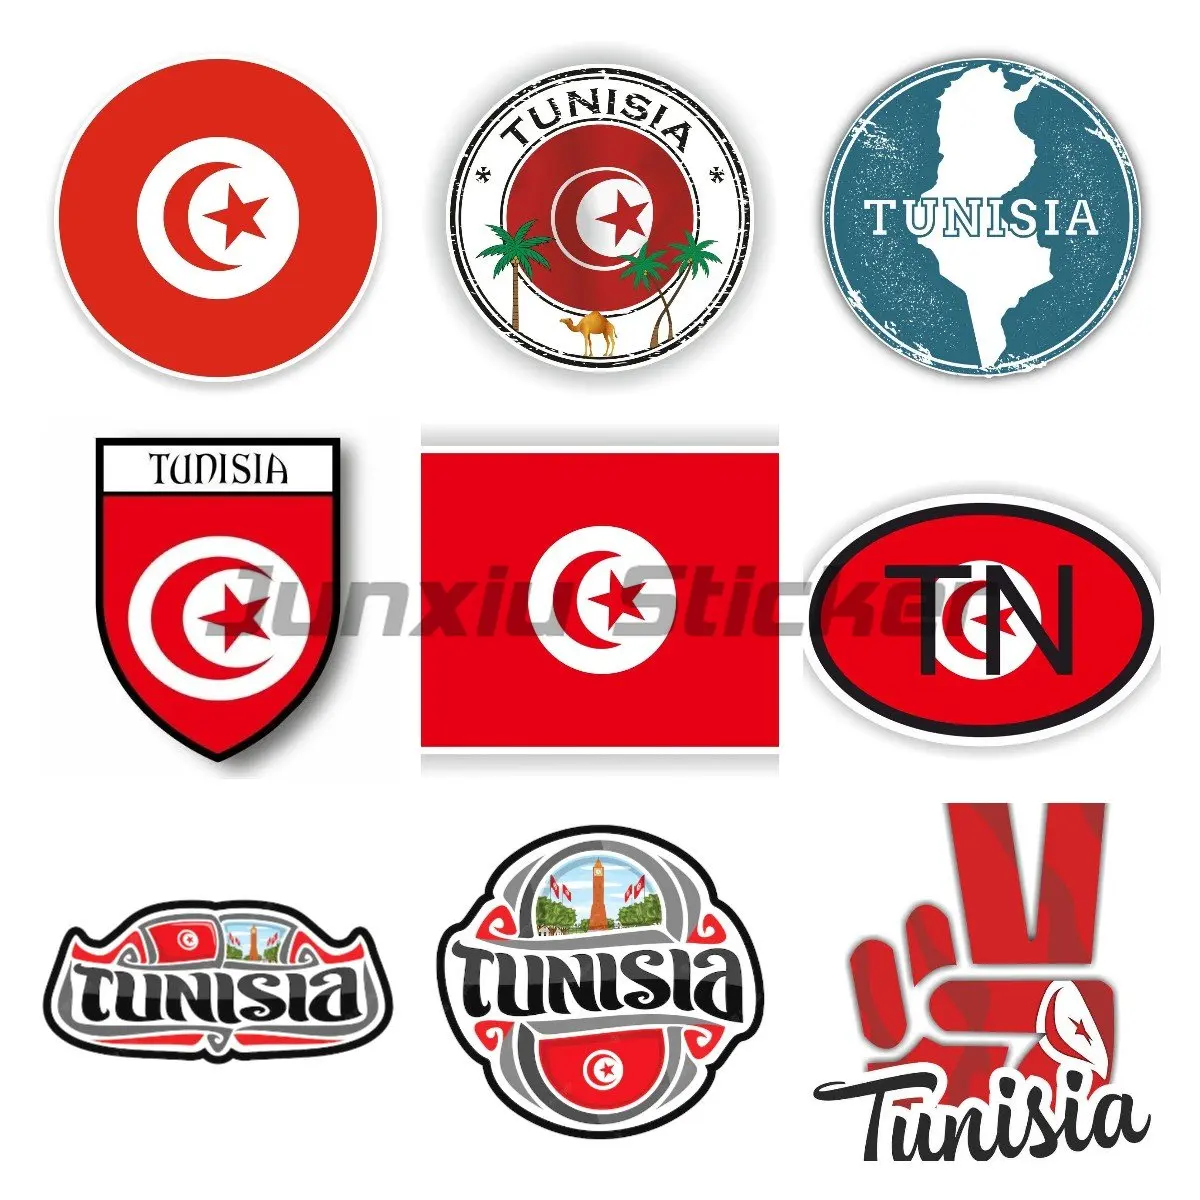 

Tunisia Country Flag Soccer Ball Self-Adhesive Sticker Inch for Automobile Bumpers, Windows, Lockers, or Other Personal Items